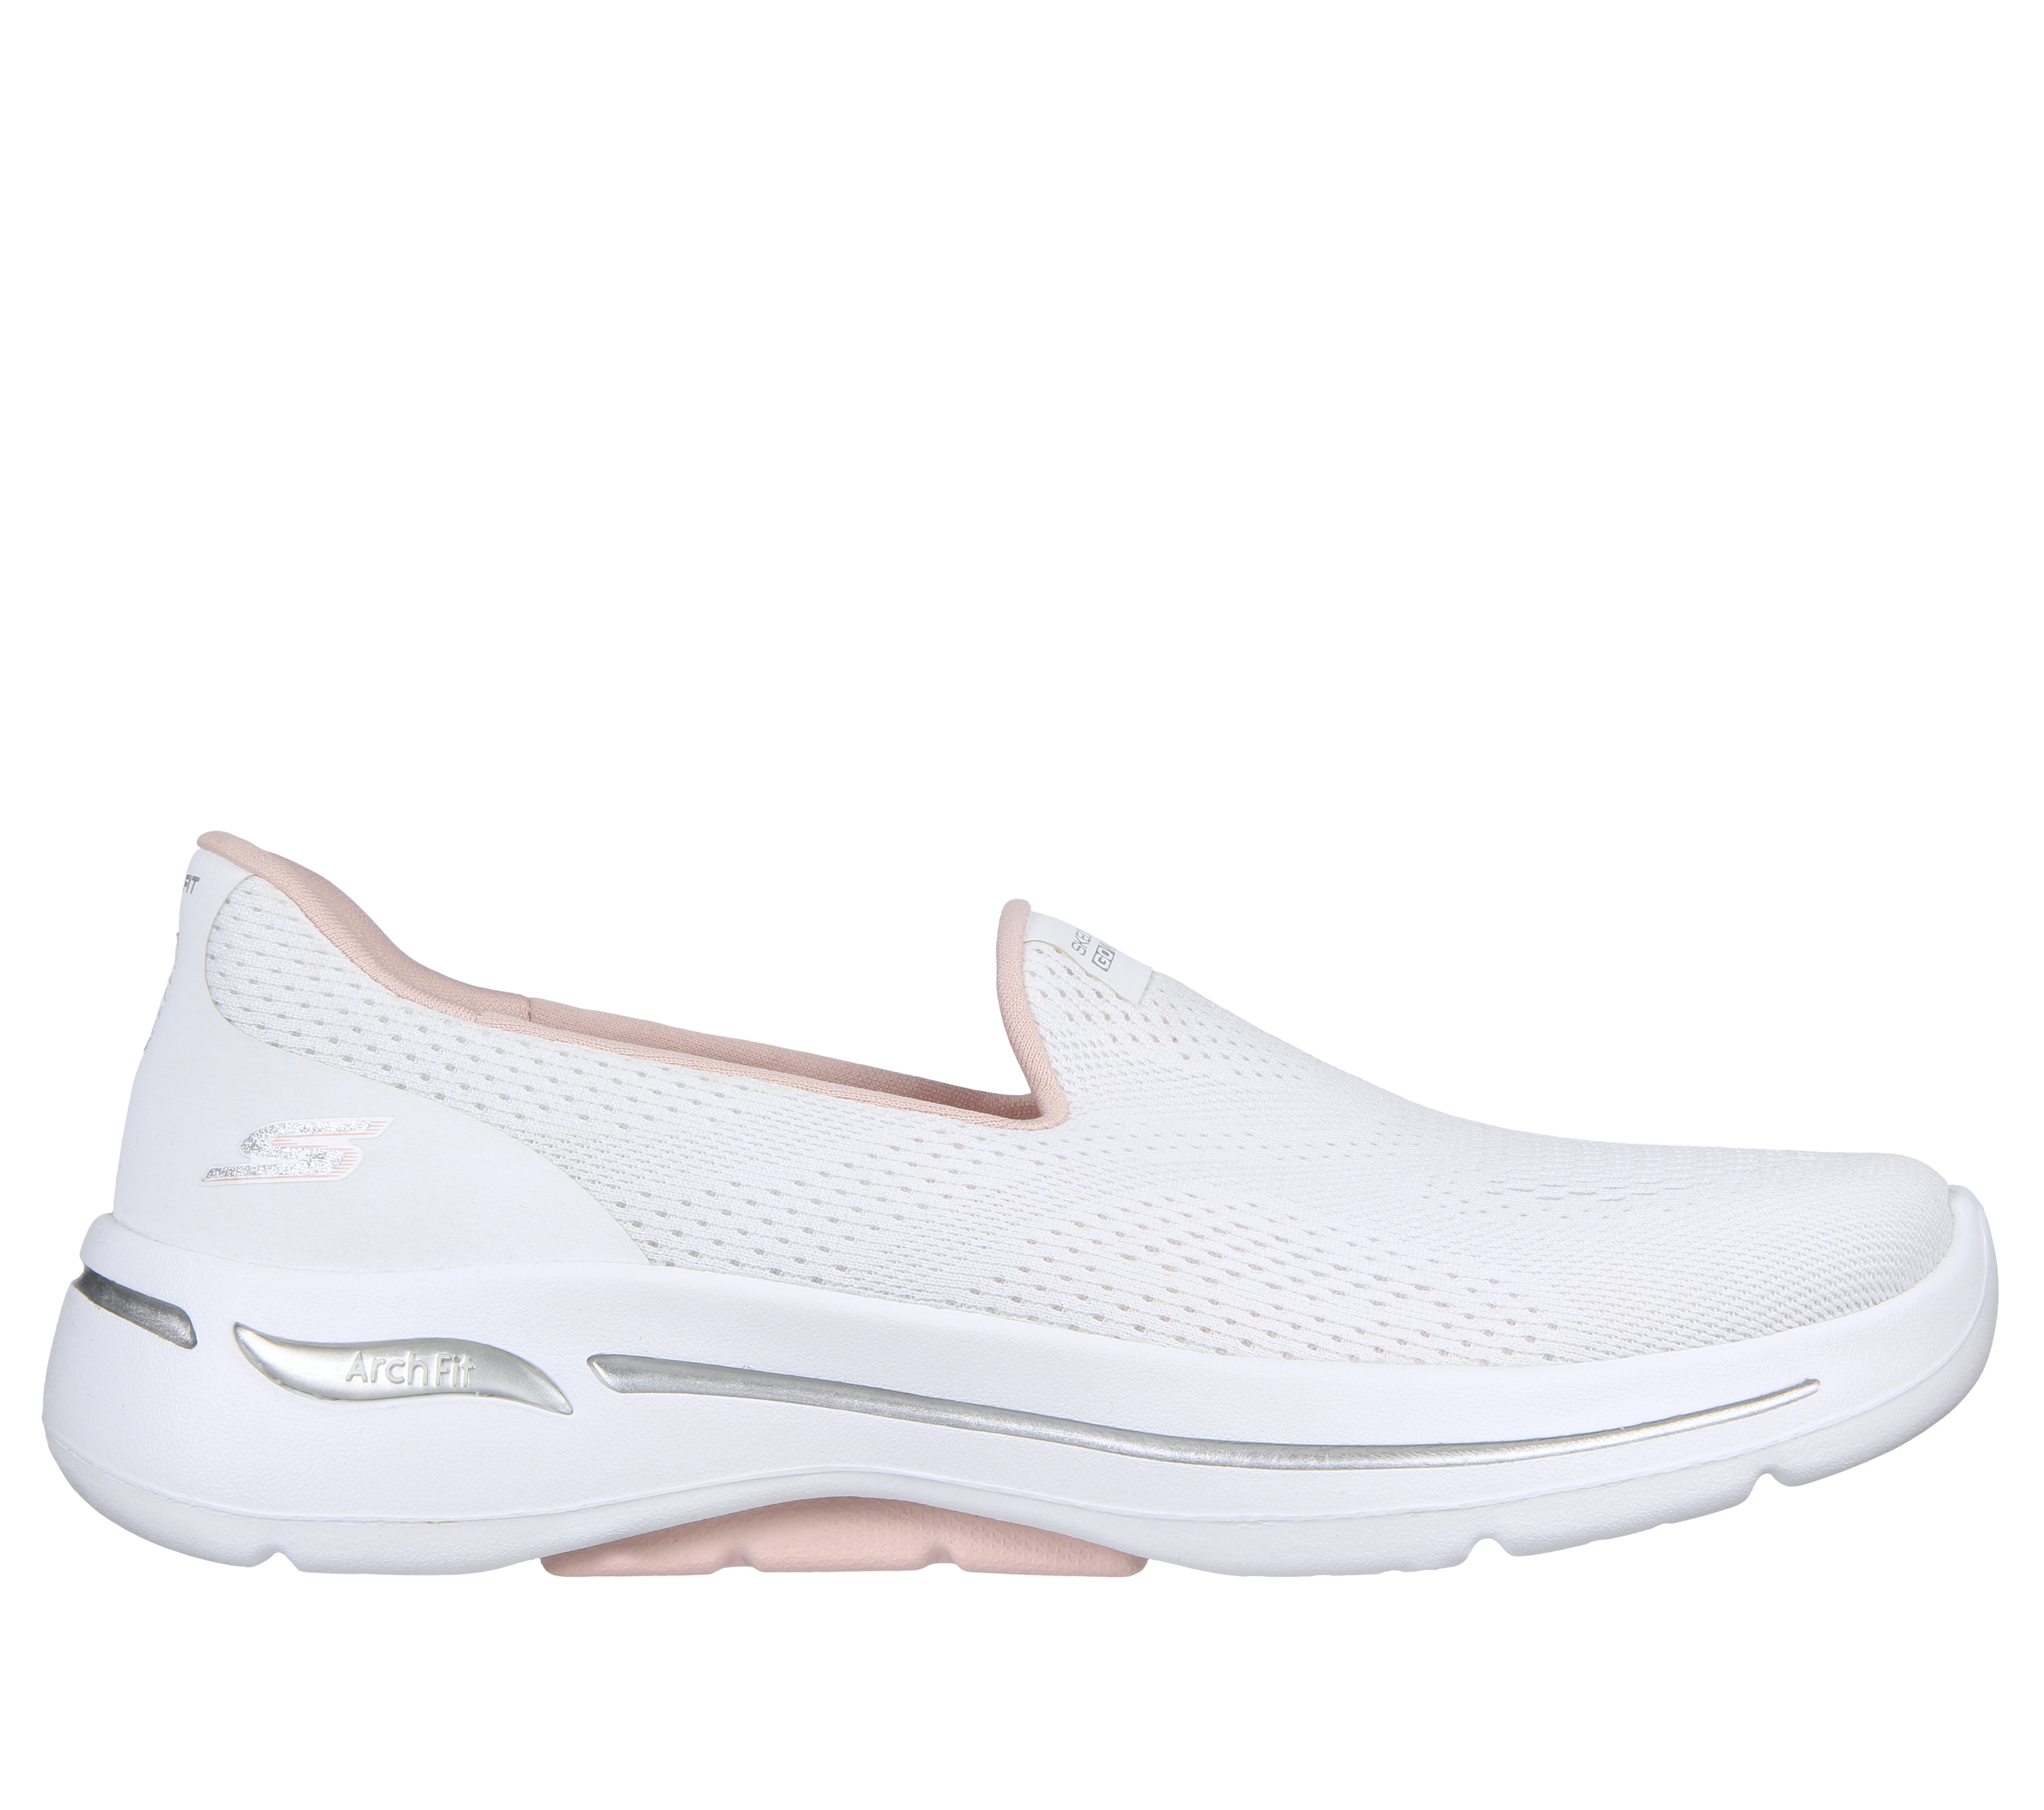 NEW WOMENS LADIES GO WALK SHOES SPORT GYM LIGHTWEIGHT SLIP ON CASUAL TRAINERS UK 